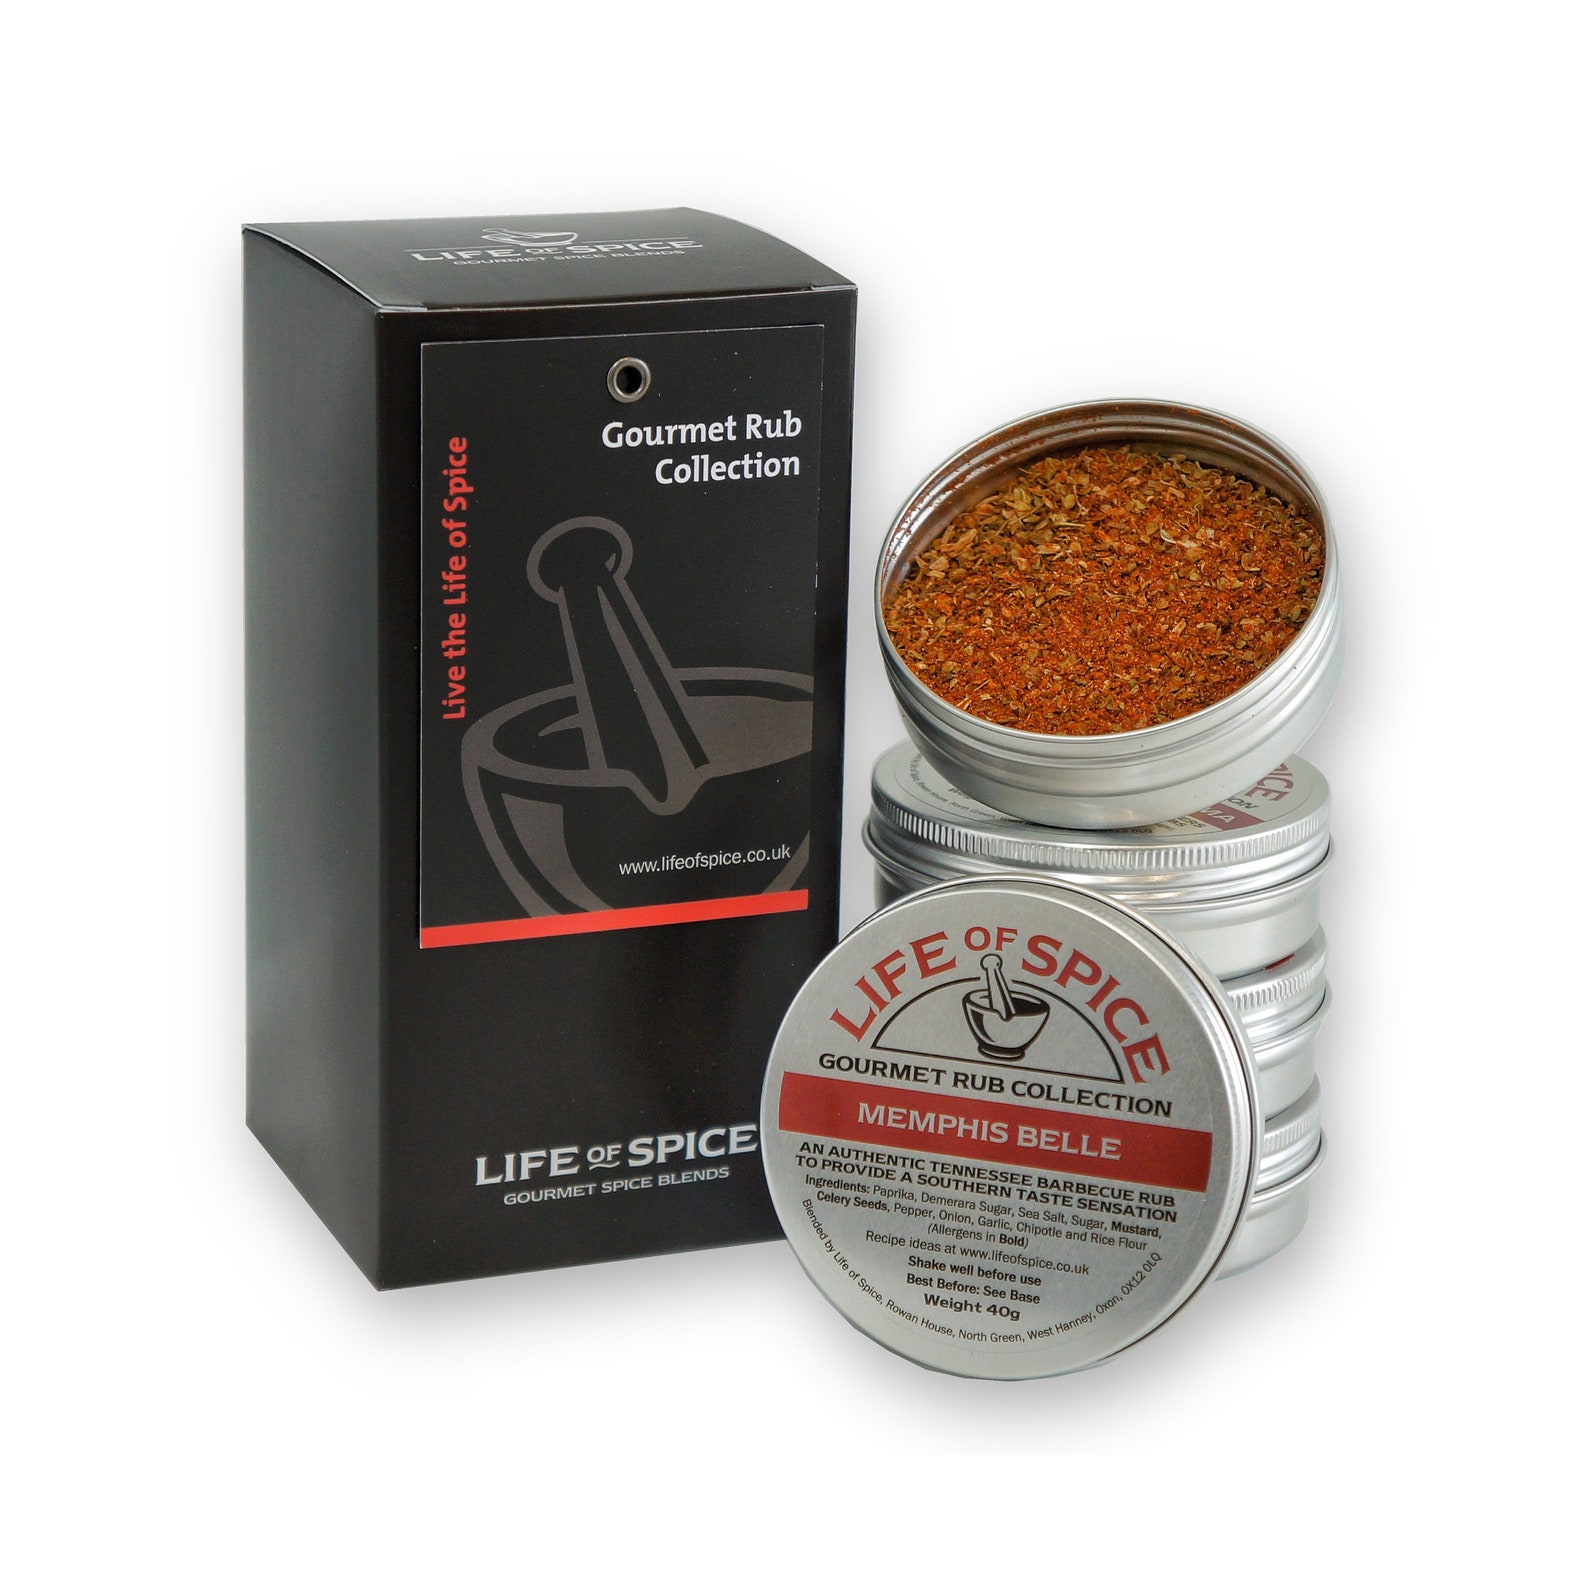 The Gourmet collection специи. The Gourmet collection Spice Blends seasfood. Spicy Gift. Set for life